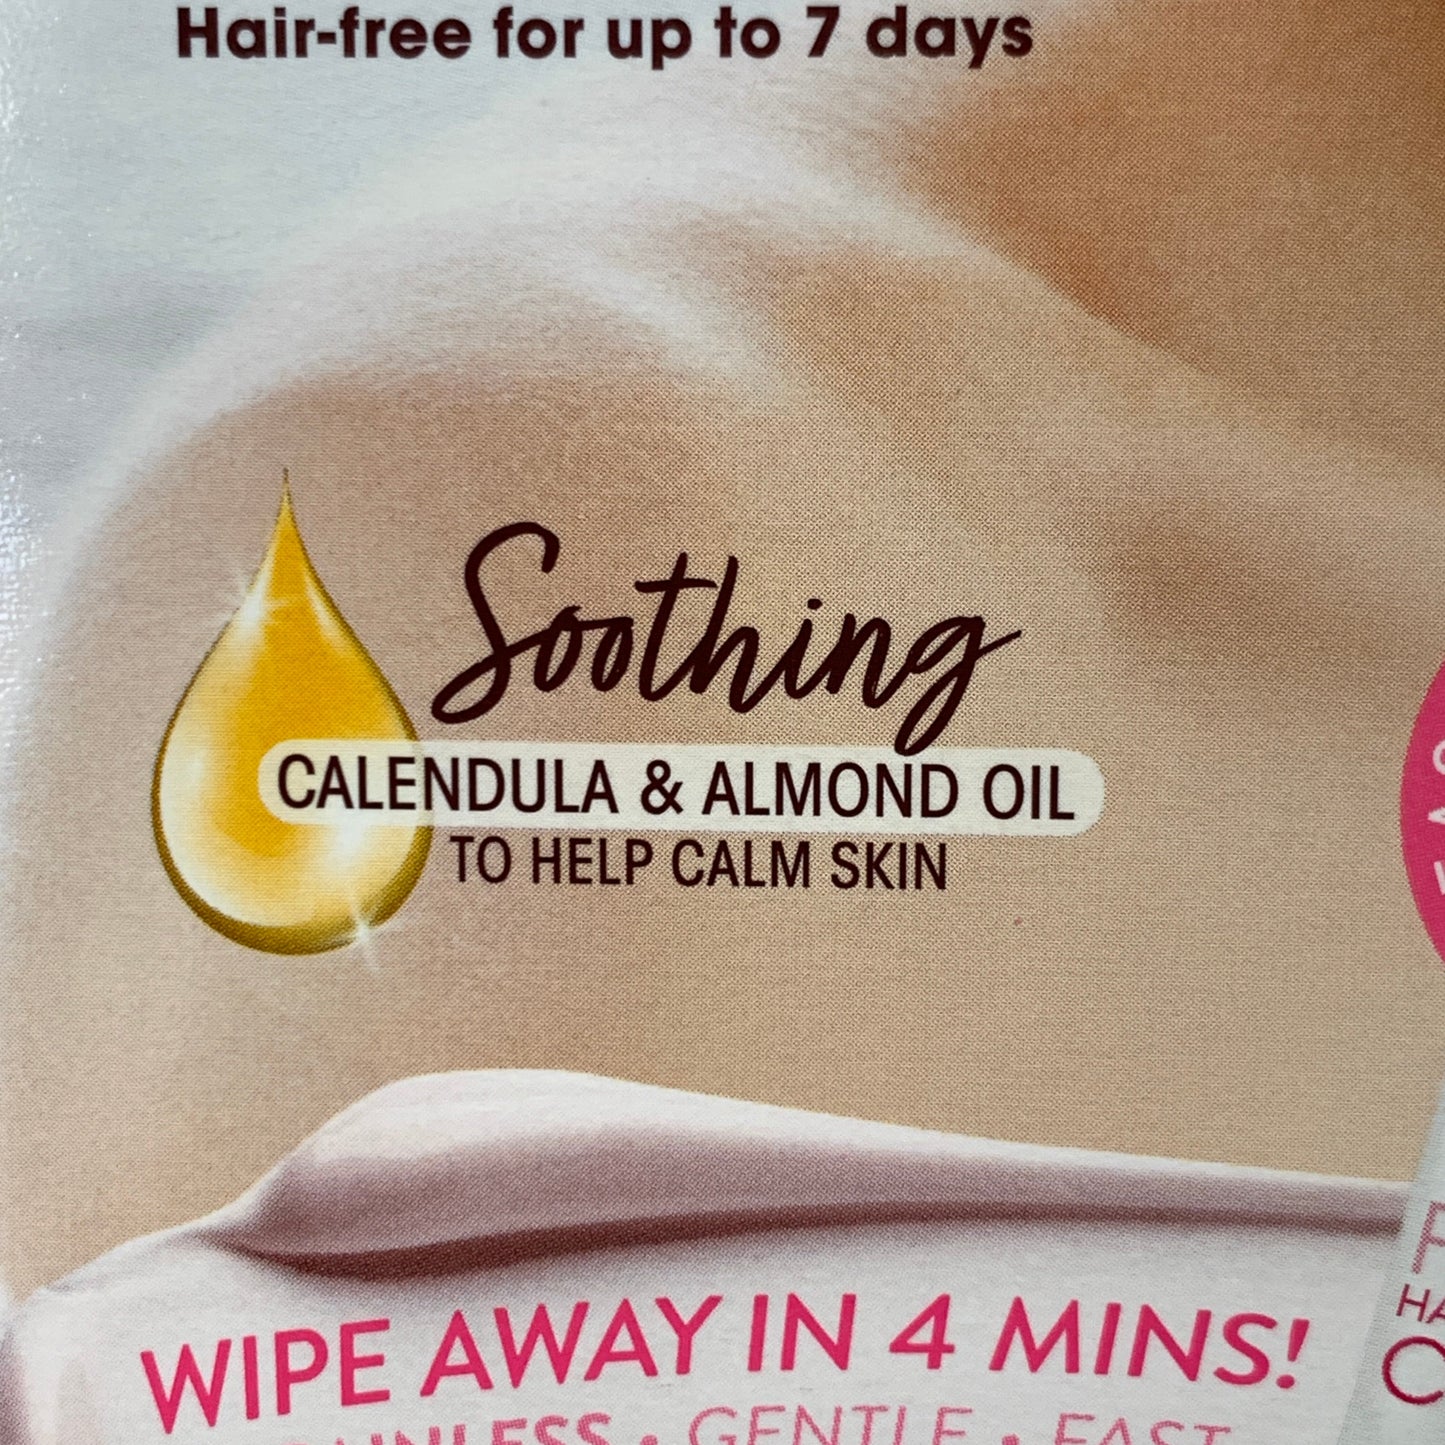 NADS Facial Hair Removal Cream Soothing Calendula and Almond Oil 0.99oz 4446EN06 (New)